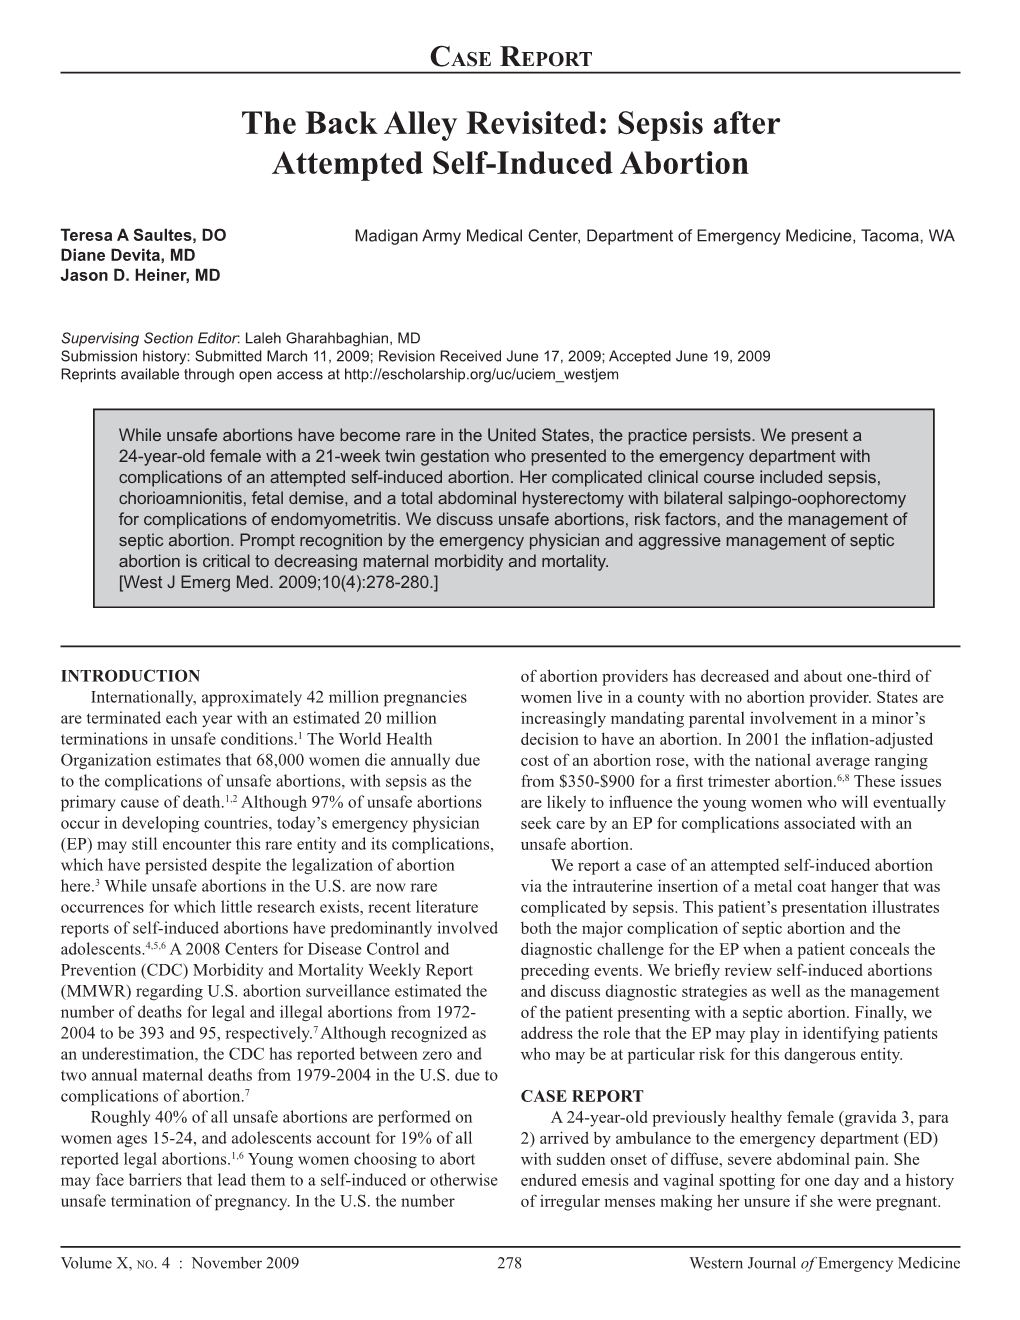 Sepsis After Attempted Self-Induced Abortion